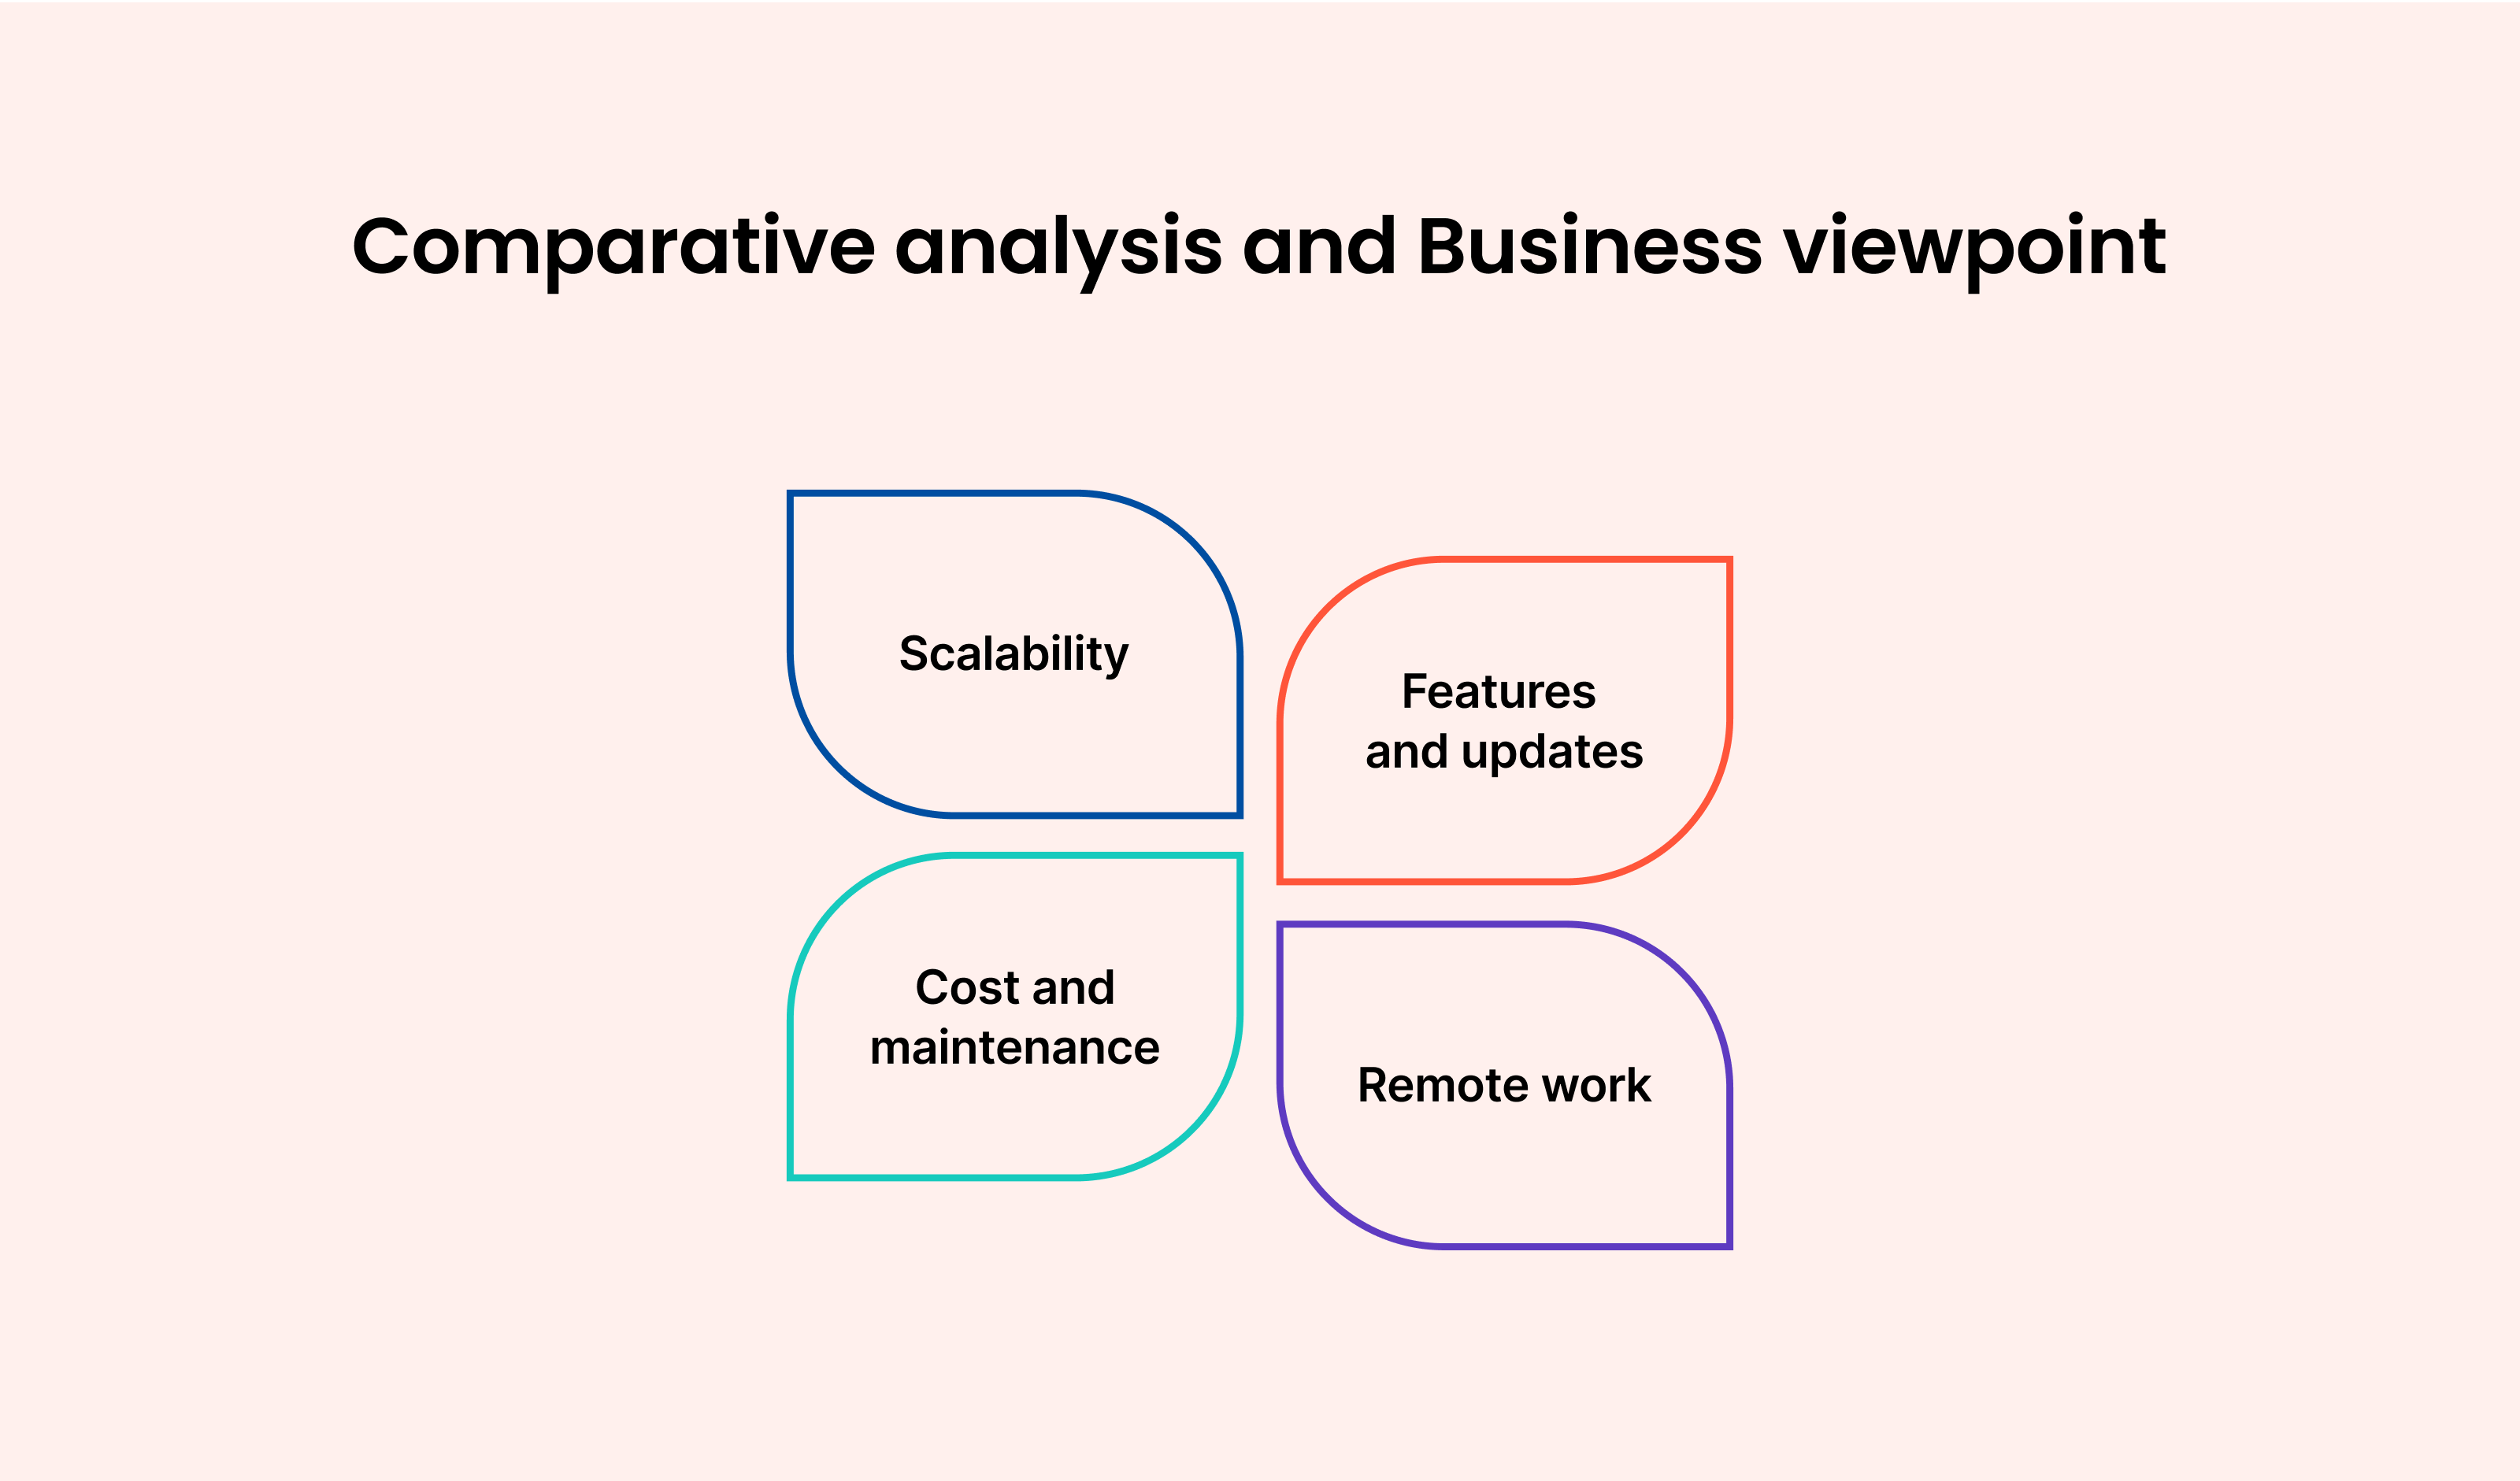 Comparative analysis and business viewpoint: